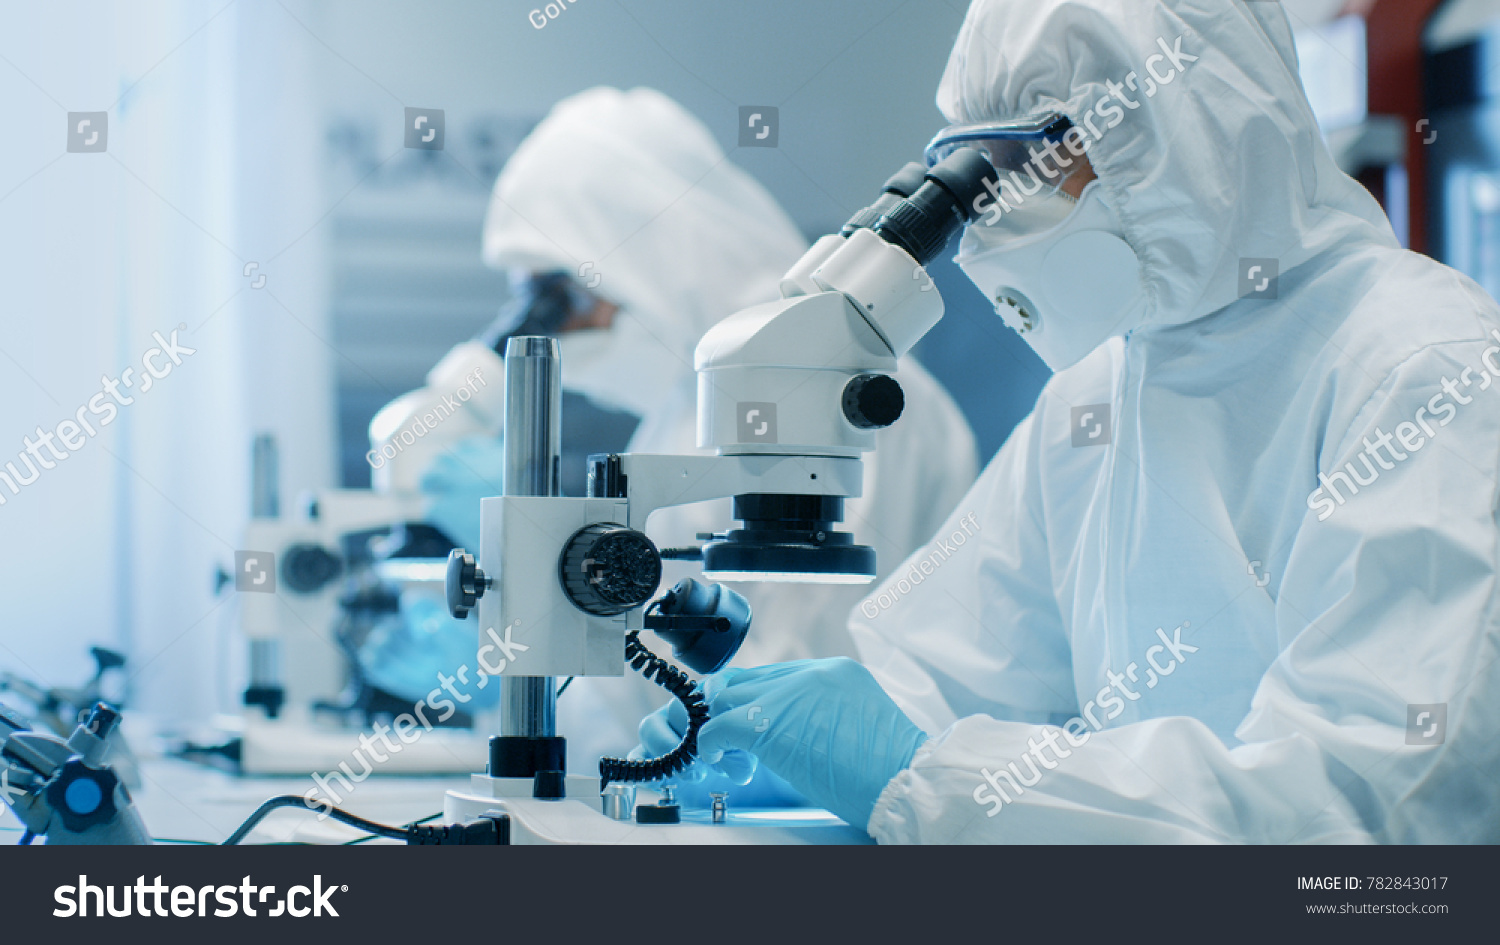 Two Engineers/ Scientists/ Technicians in Sterile Cleanroom Suits Use Microscopes for Component Adjustment and Research. They Work in an Electronic Components Manufacturing Factory. #782843017